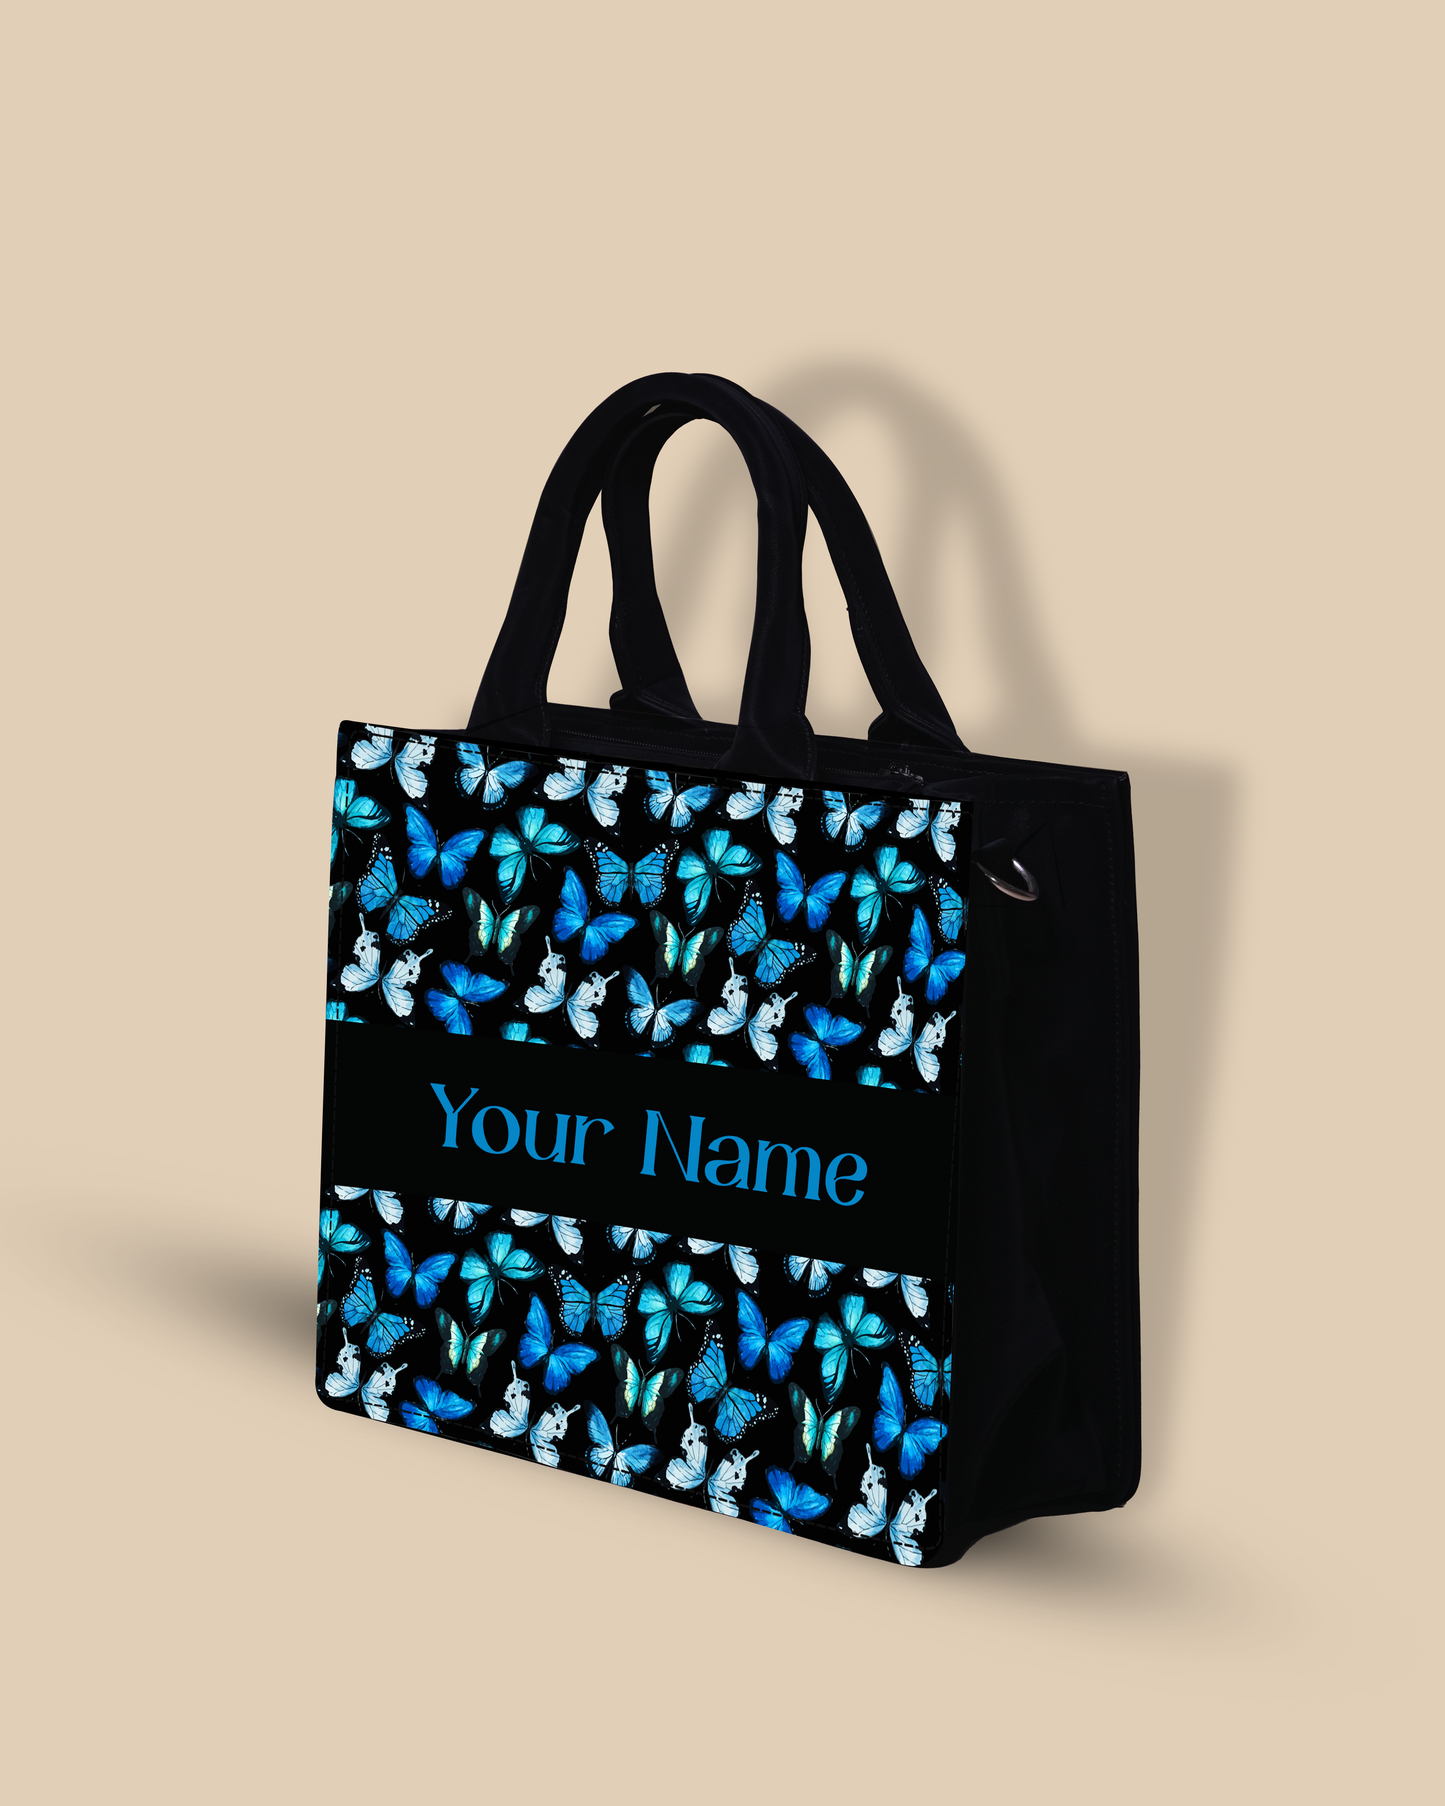 Personalized Small Tote Bag Designed With Blue Flying Butterflies